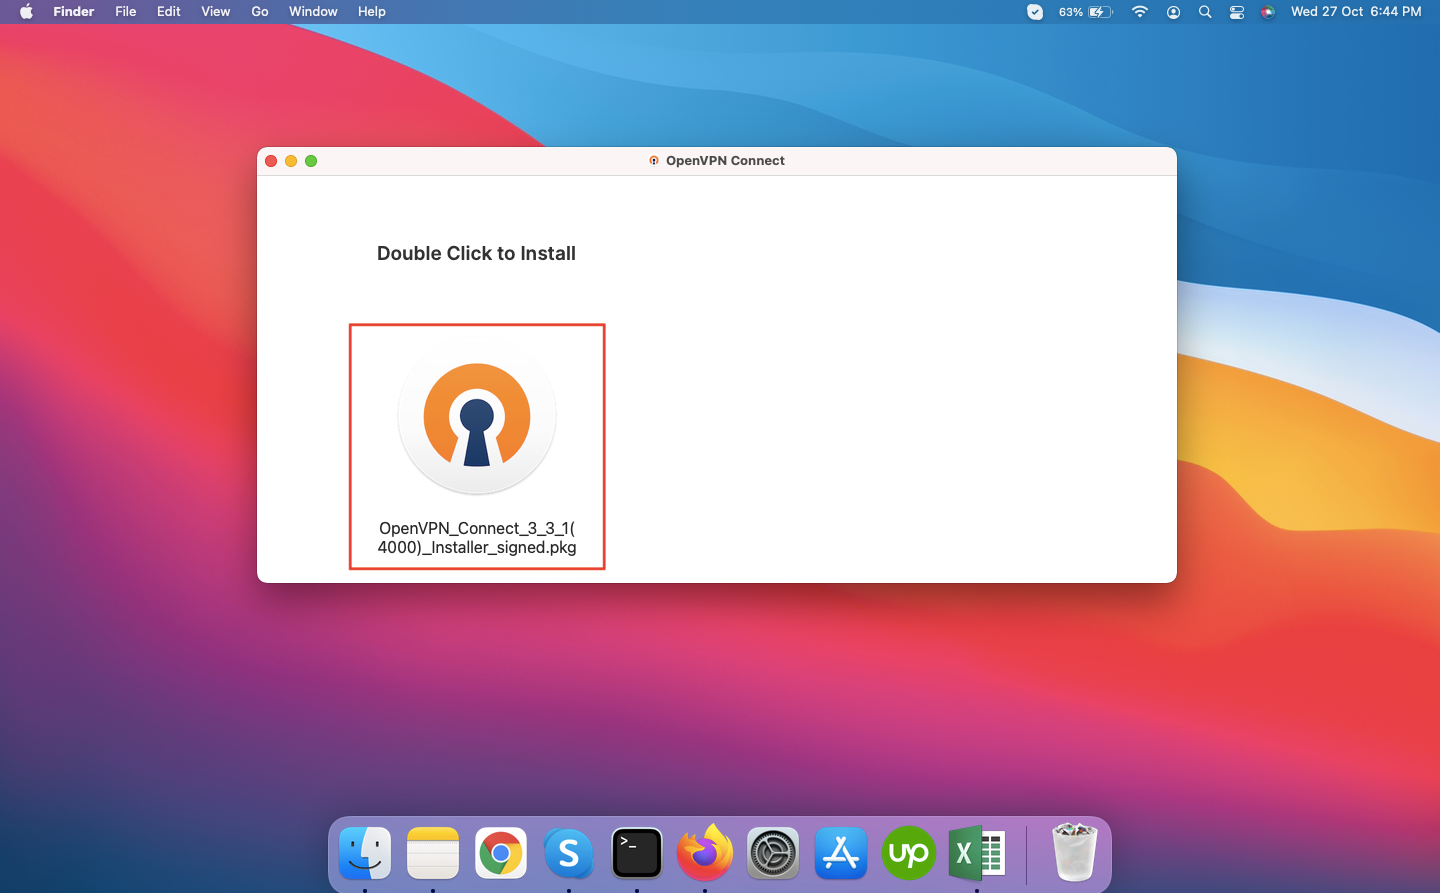 How to install OpenVPN on Mac - All available options